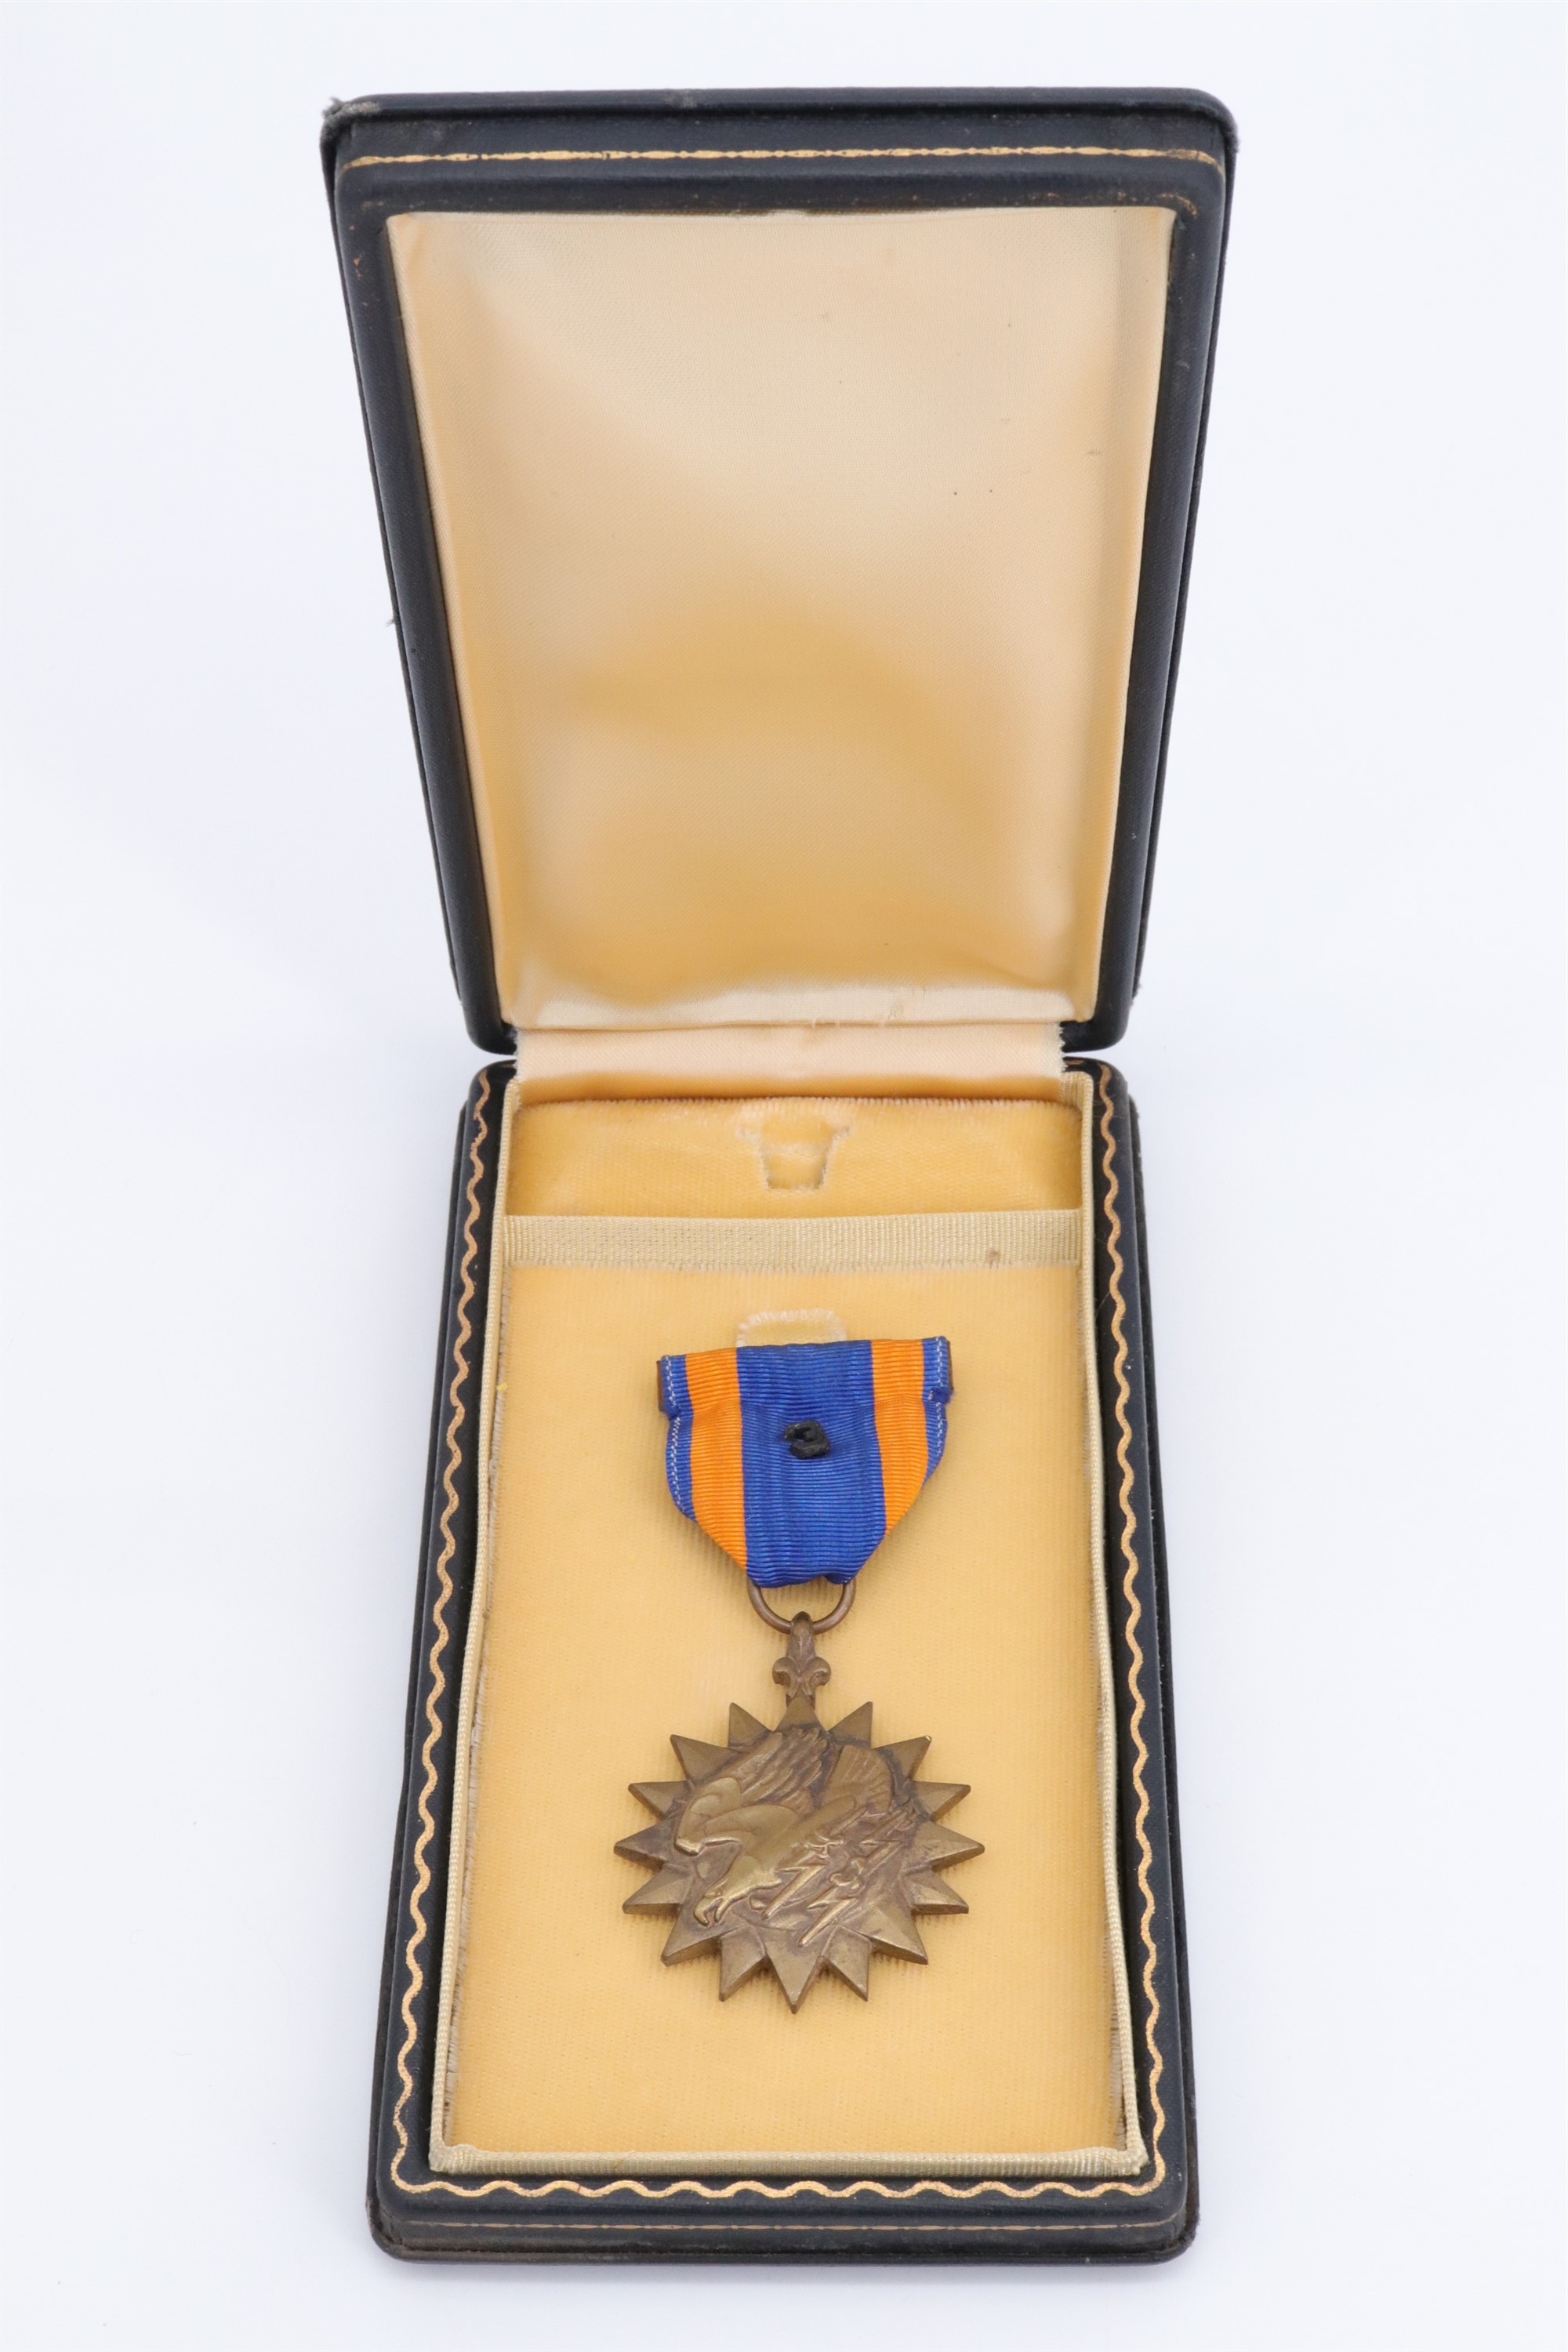 A US Air Medal, cased